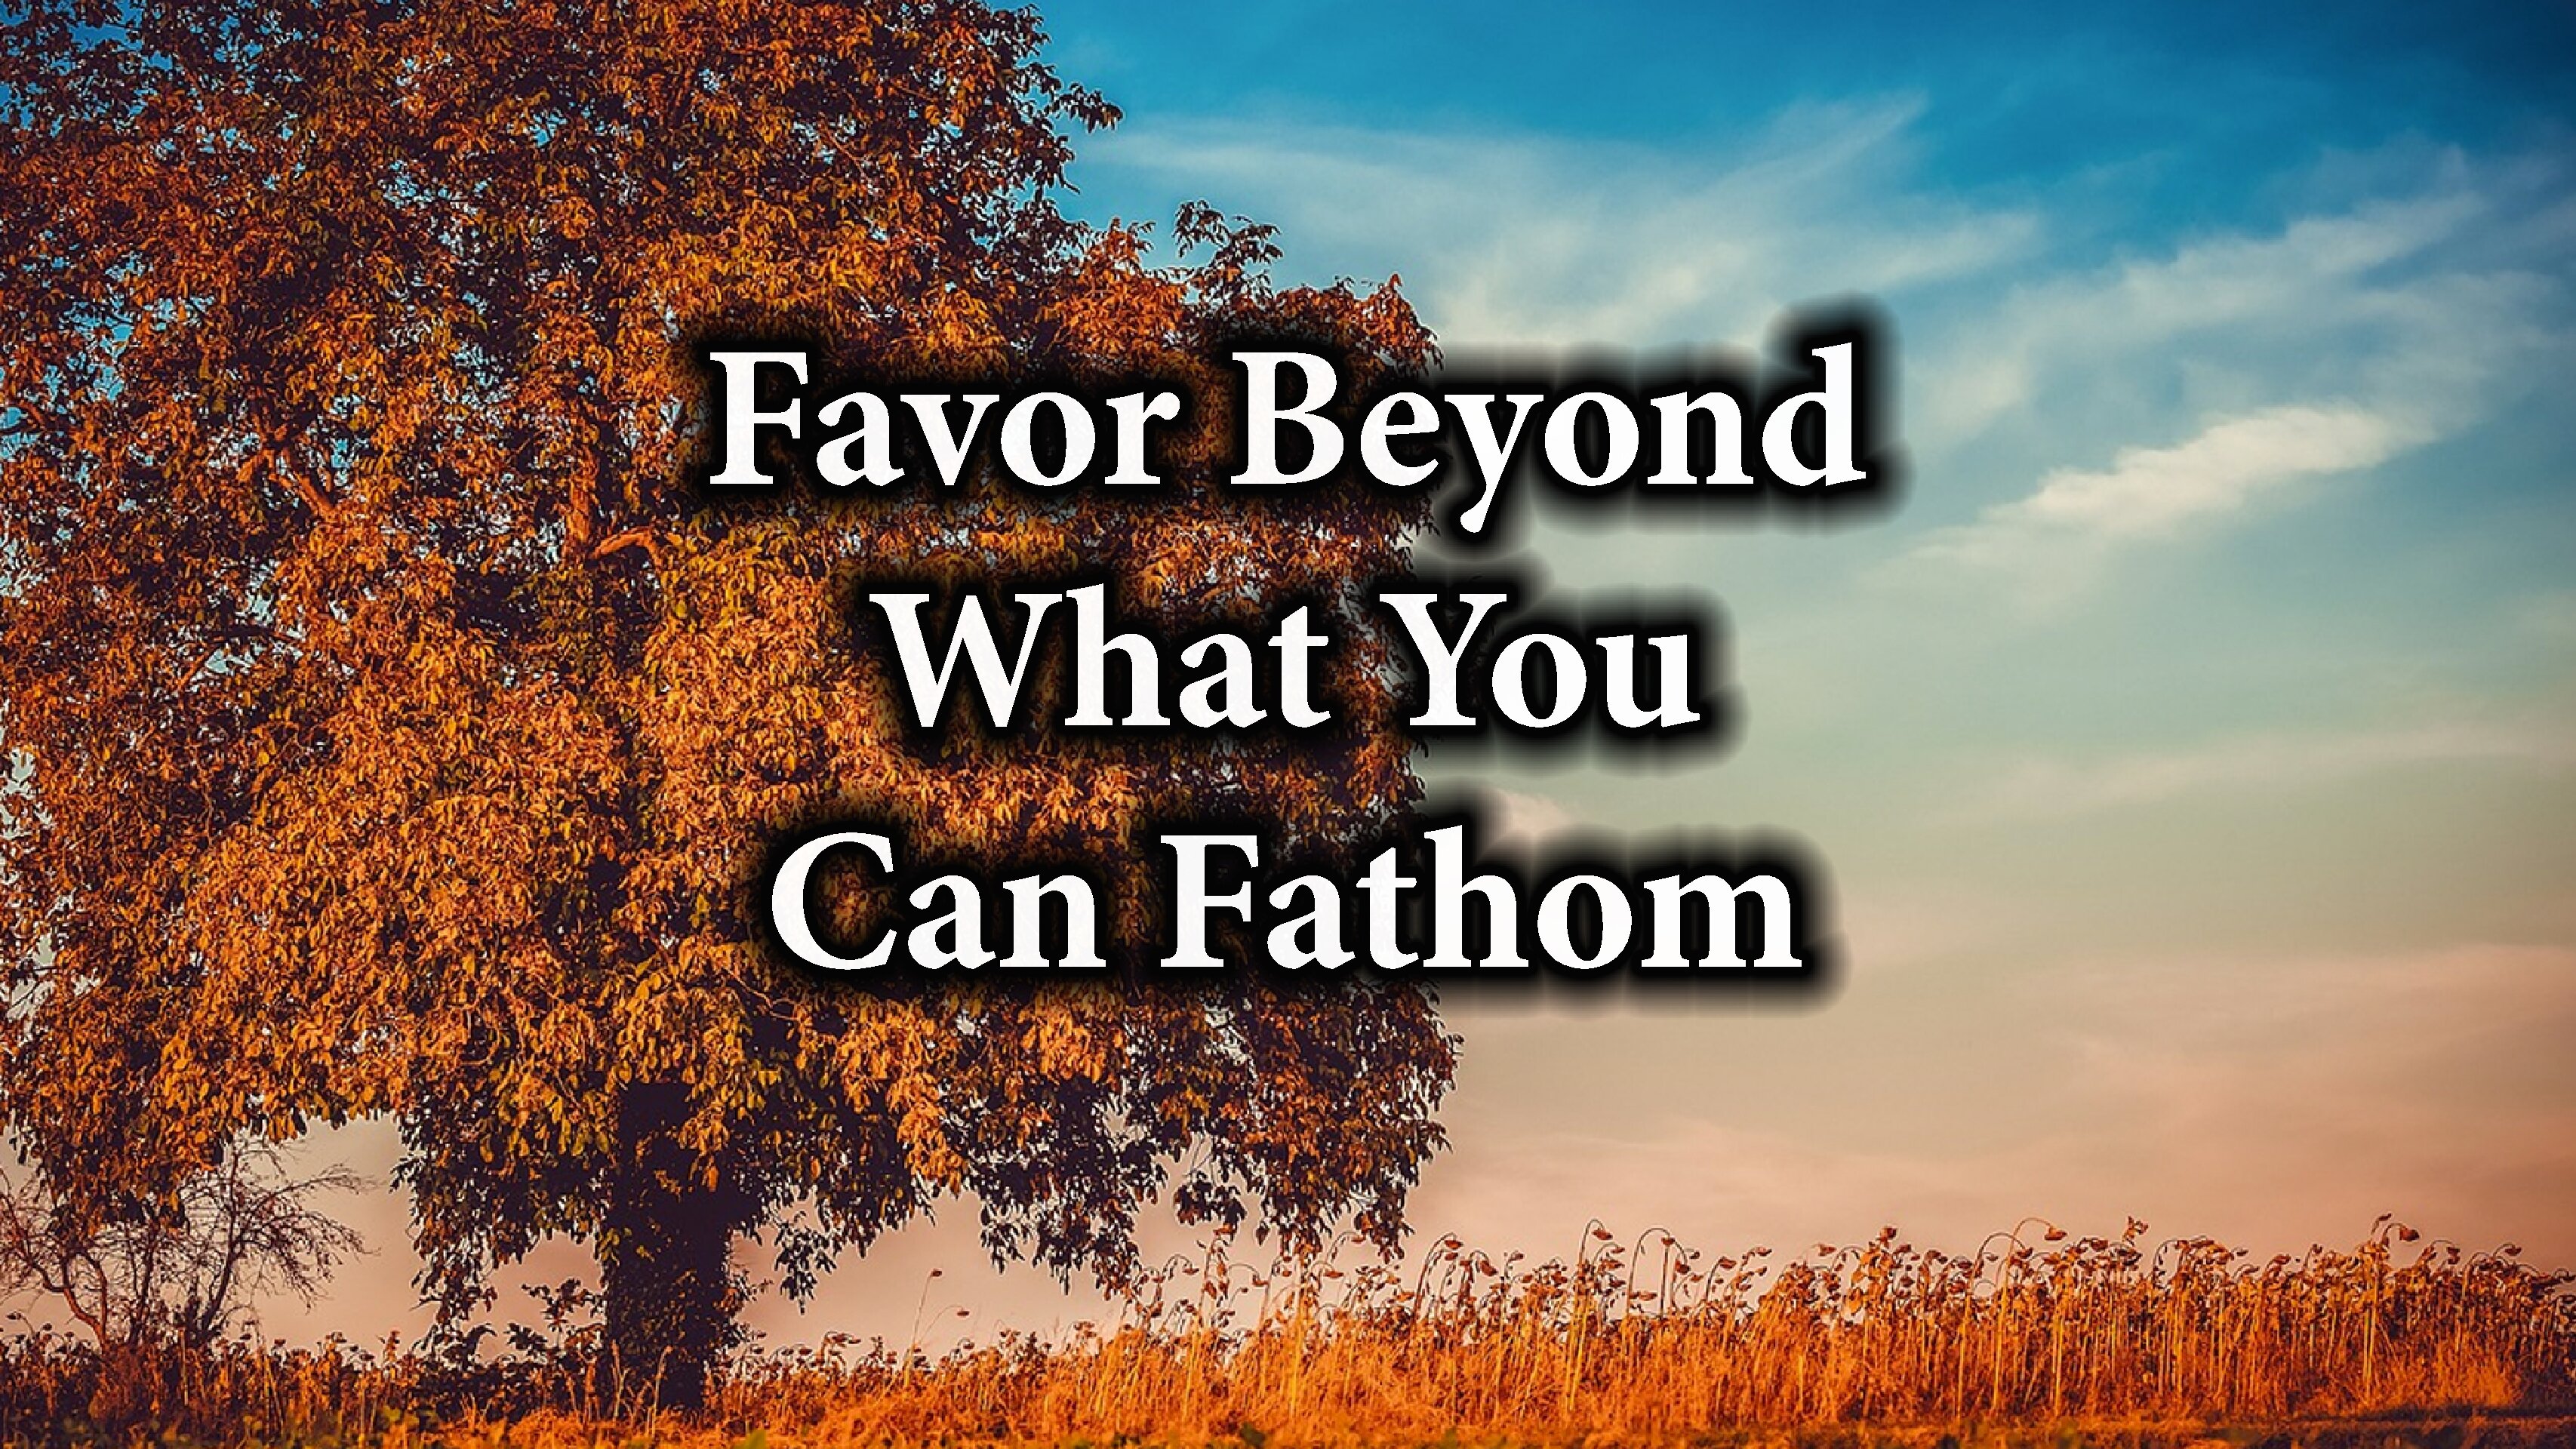 Favor Beyond What You Can Fathom